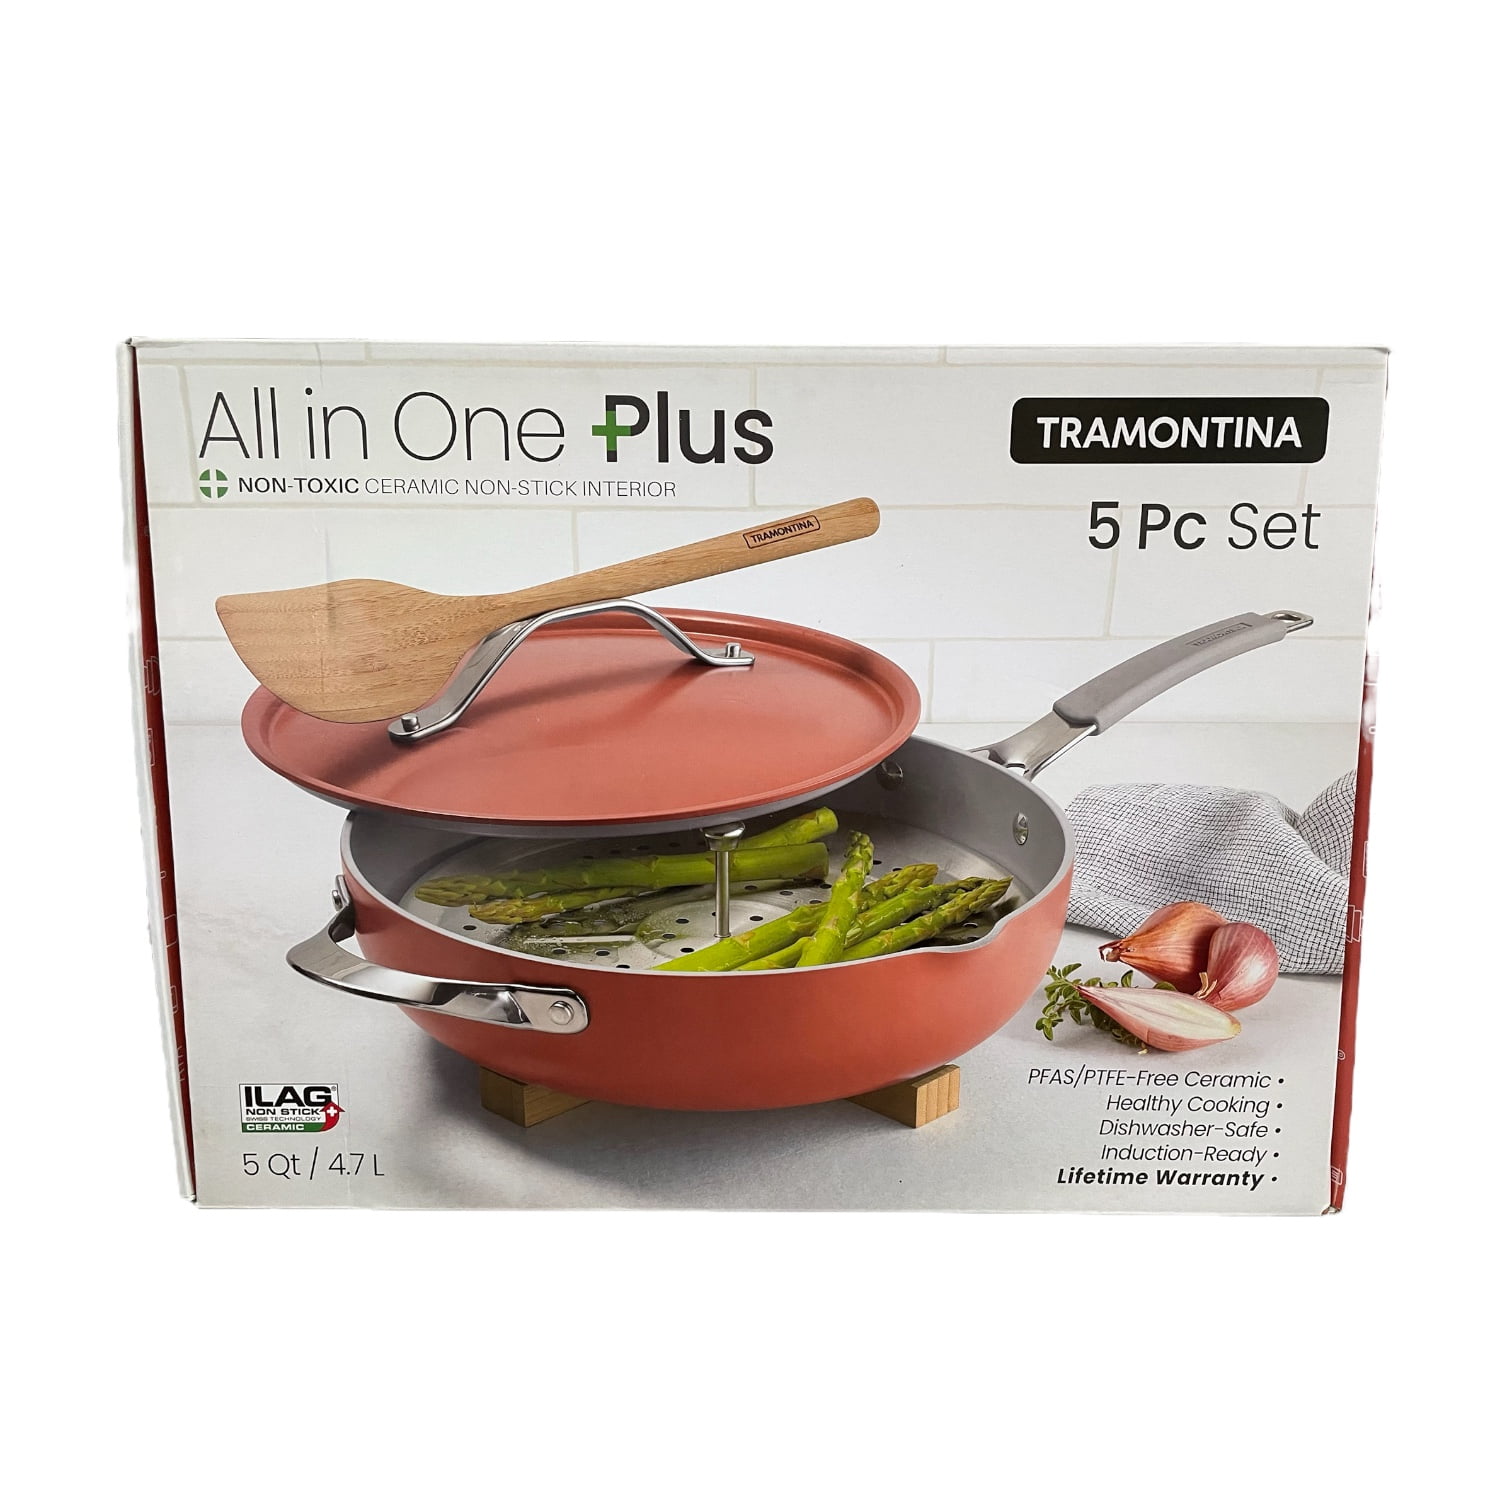 Tramontina 5 qt Ceramic Non Stick All in One Plus Pan 5 PC Set Color: Green 80110/087DS